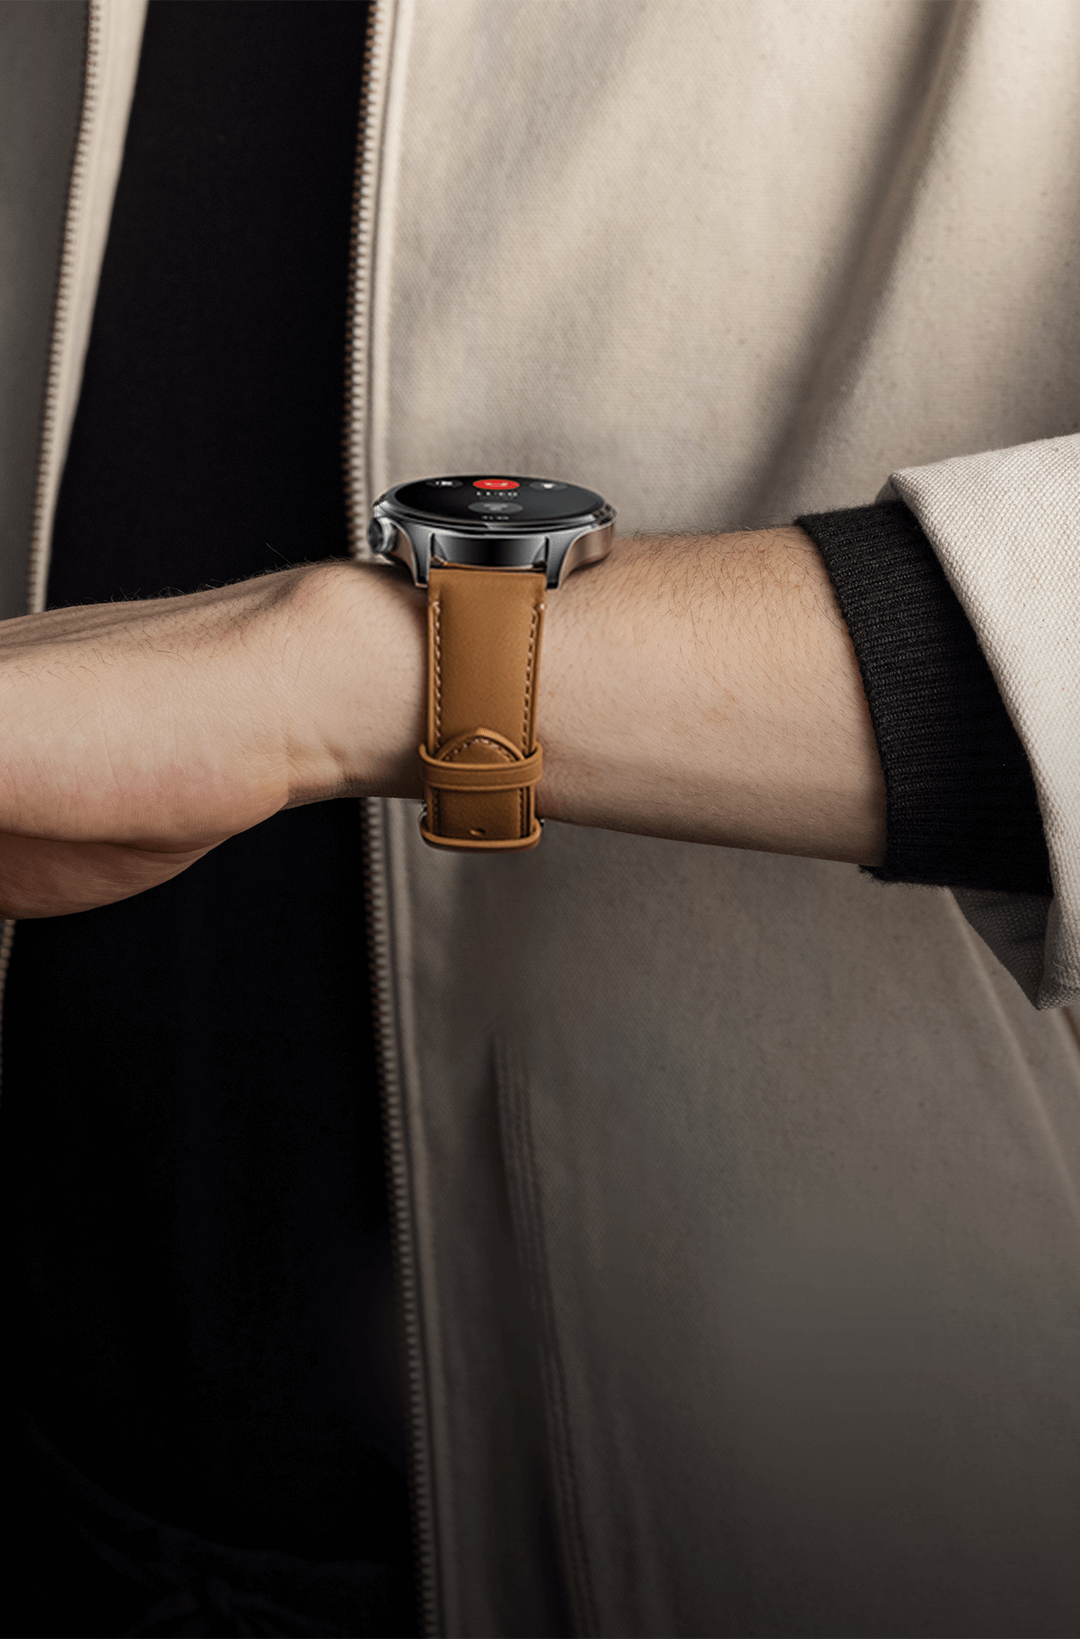 Xiaomi Watch S1 Pro, Classic, Sleek Design with rotatable Crown, 1.47  AMOLED Display, Ultra-Thin bezels, All-New MIUI Watch OS, Advanced Health  and